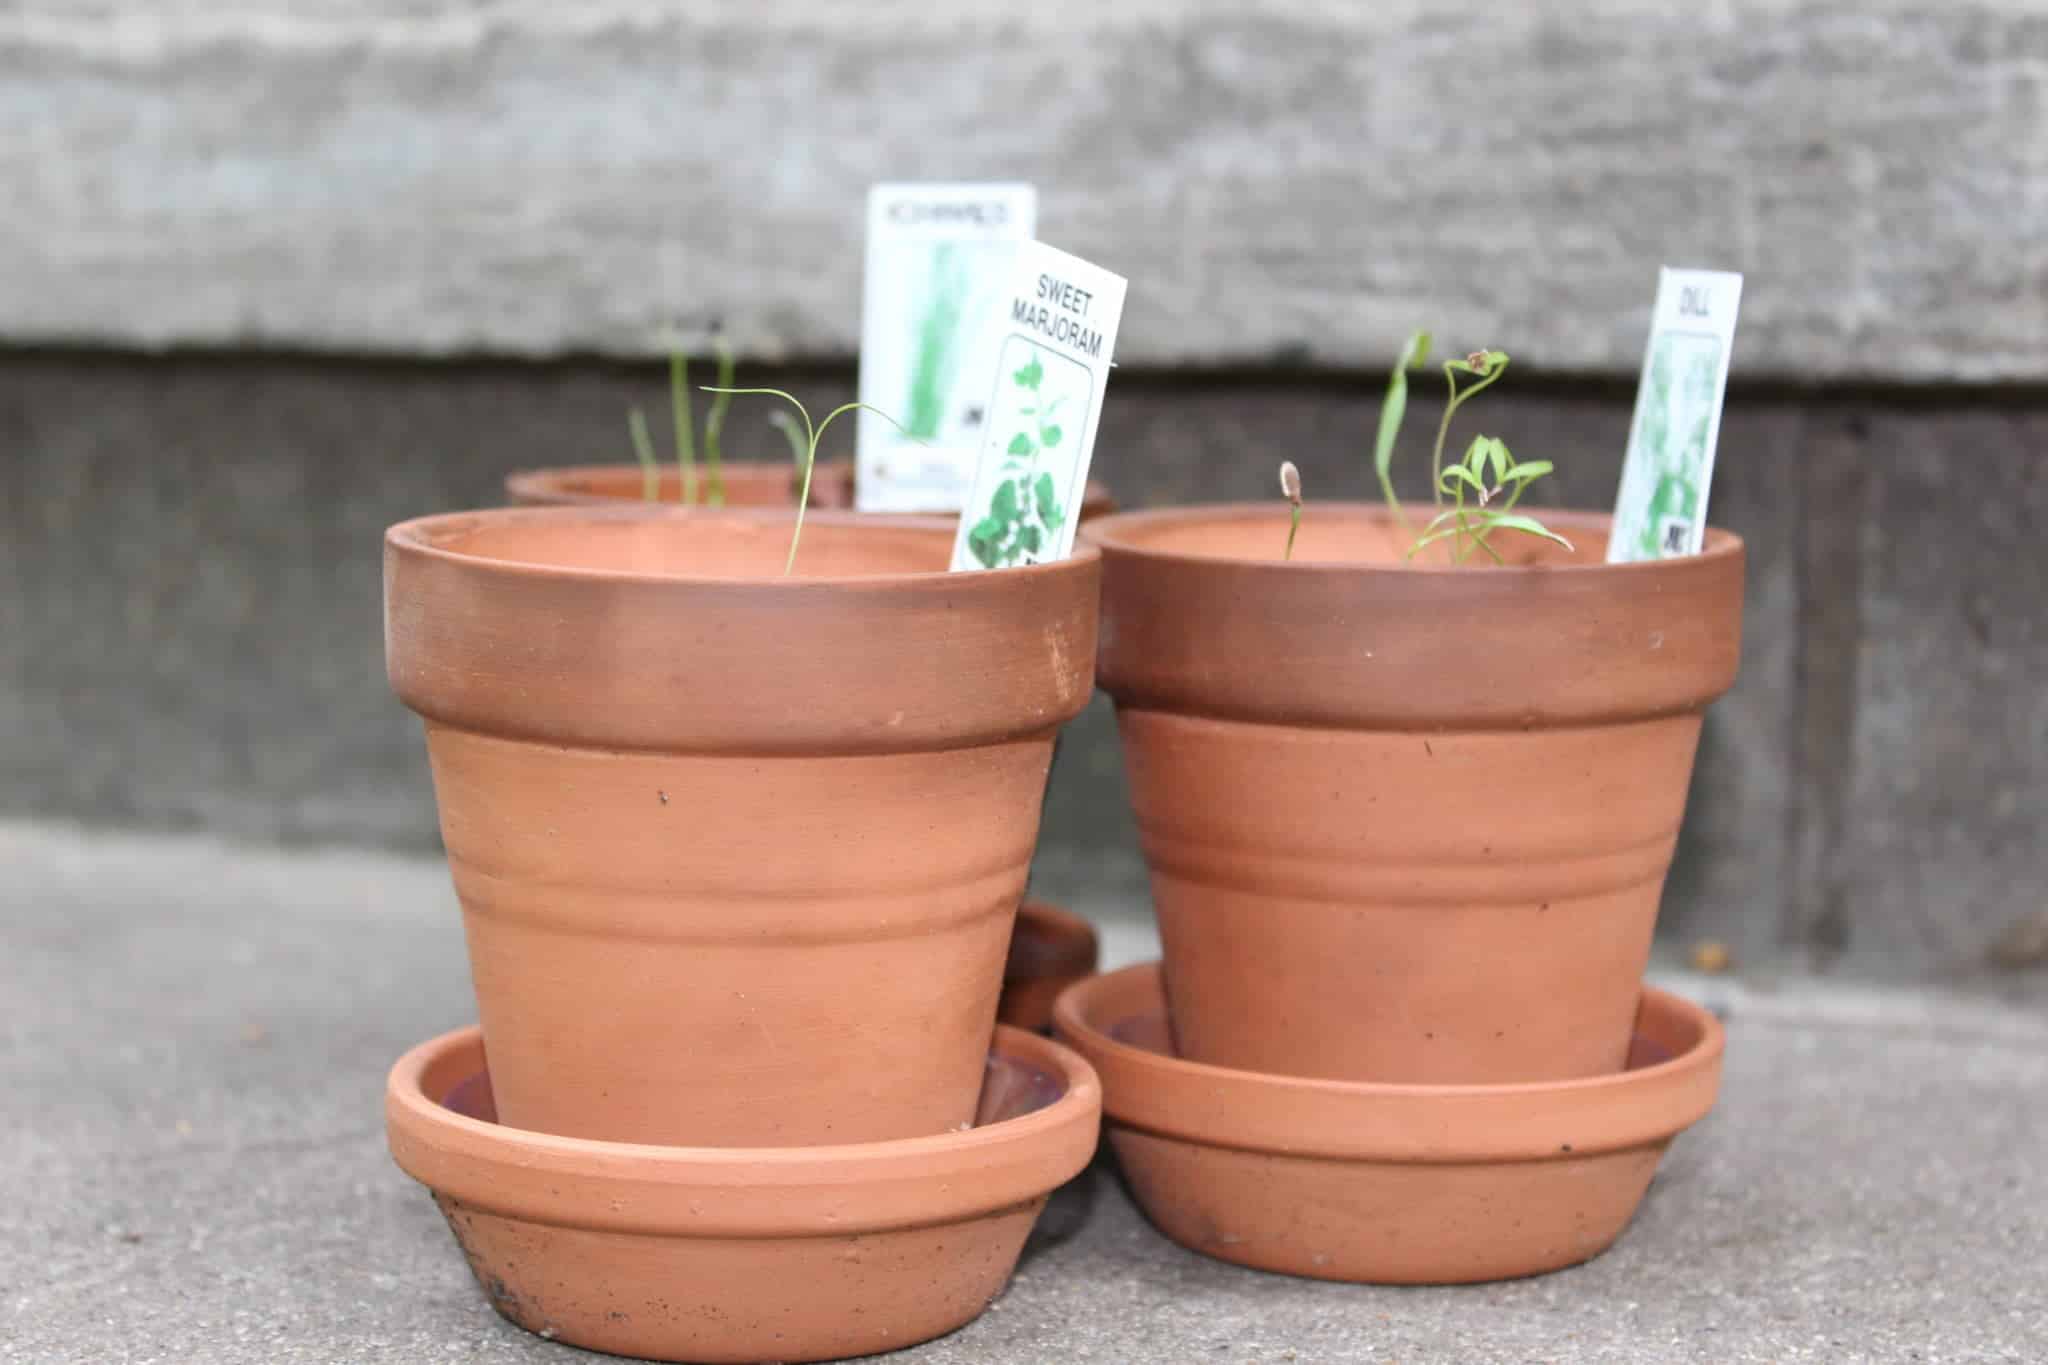 three small red clay pots with seedlings growing